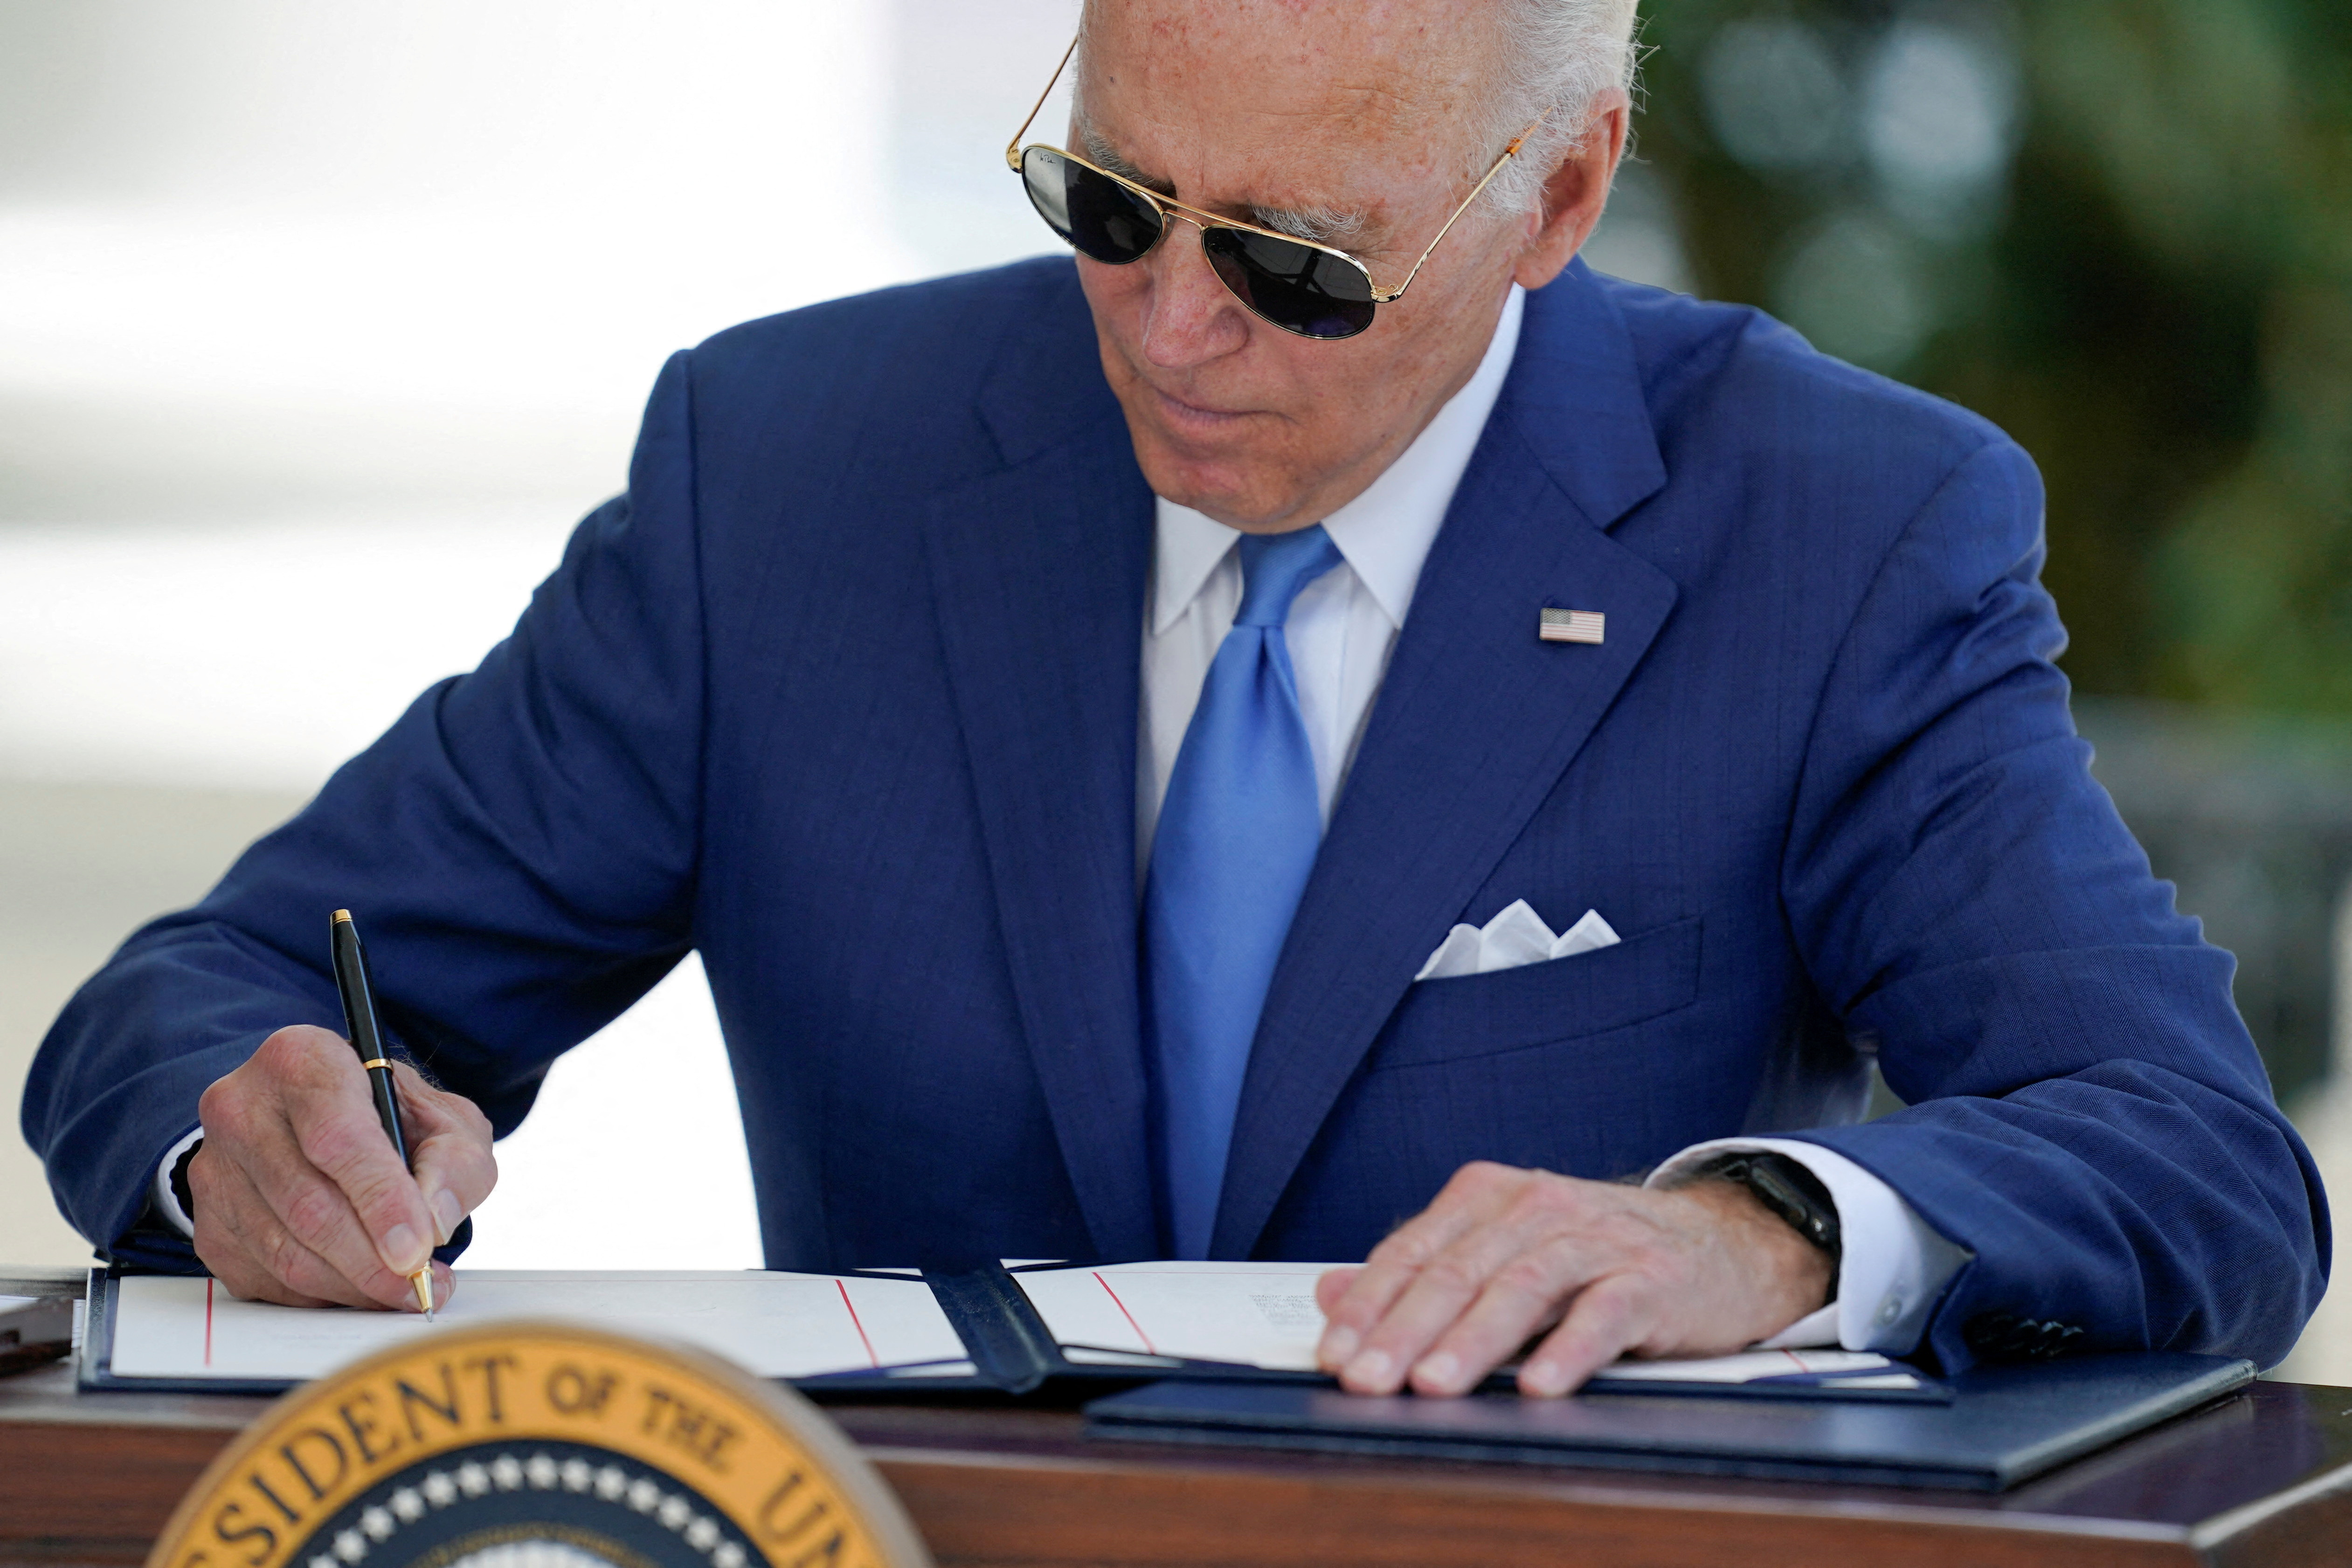 U.S President Joe Biden signs two bills aimed at combating fraud in the COVID-19 small business relief programs in Washington